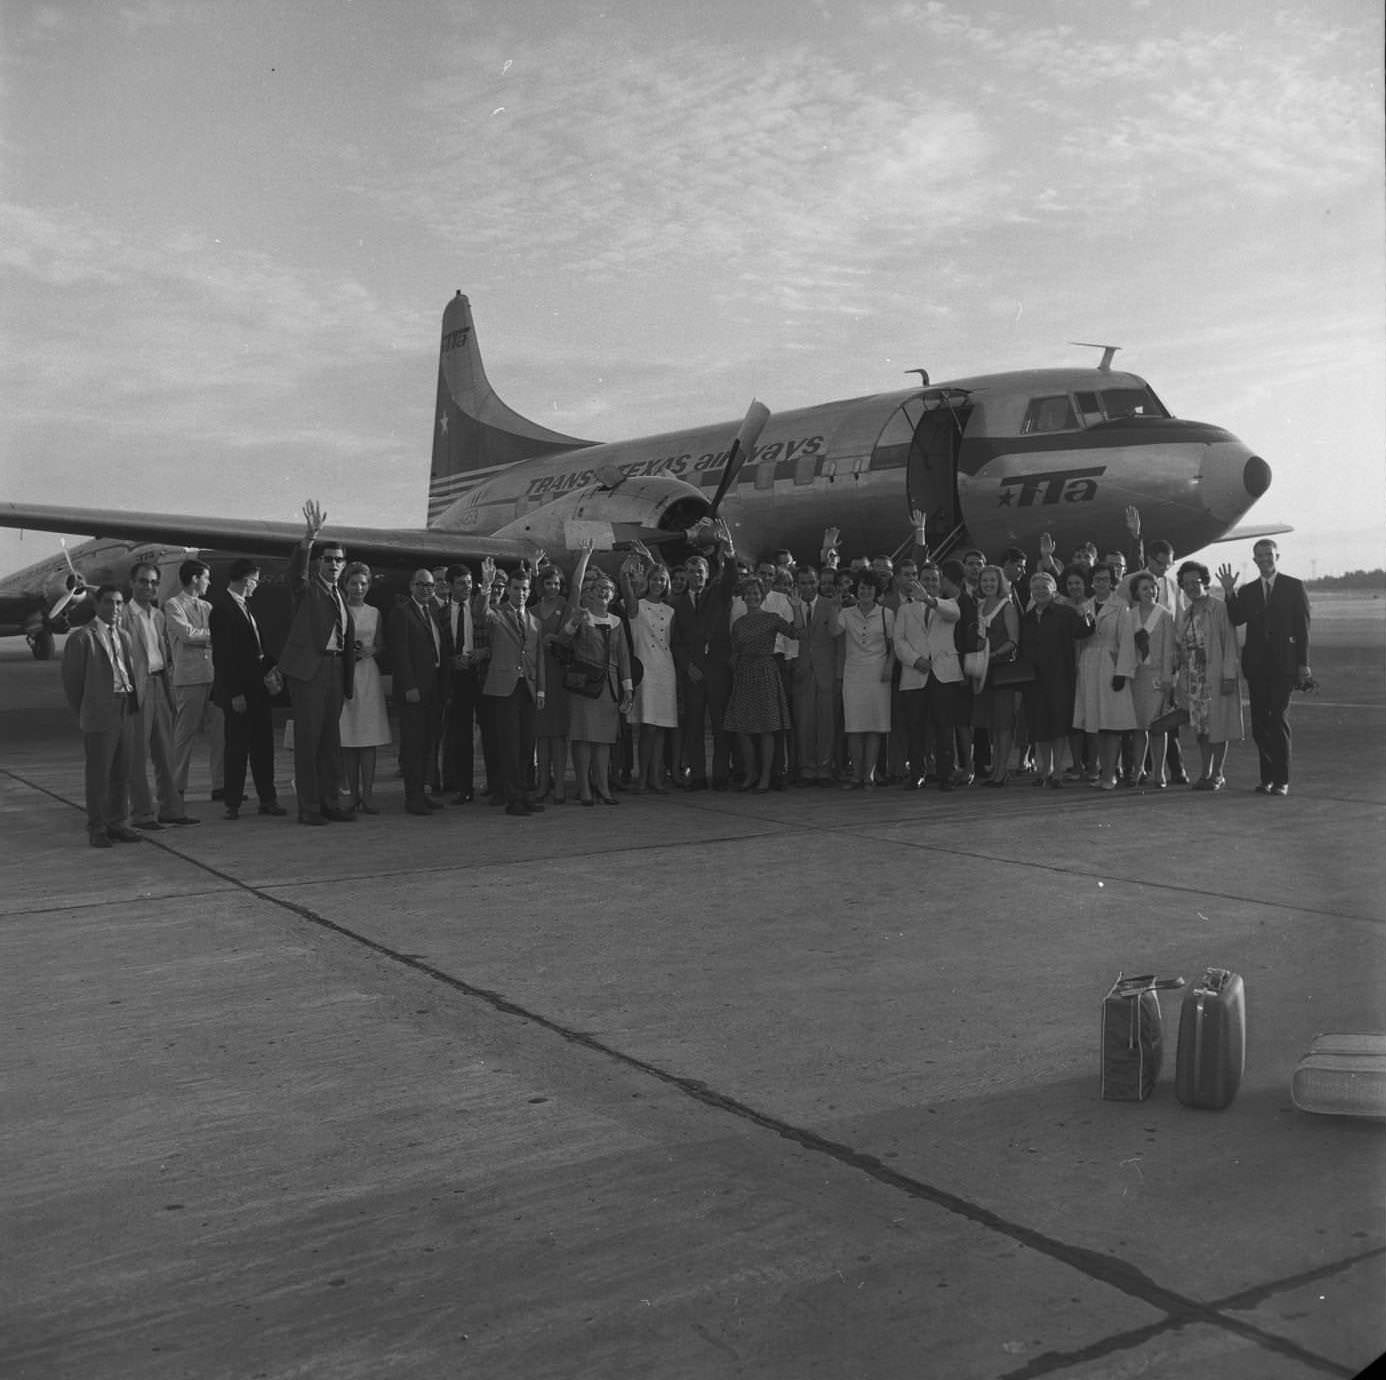 Passengers and crew wave goodbye on the tarmac before departure at Mueller Airport. Plane is Convair 240. TTA DC-3 in left background, 1966